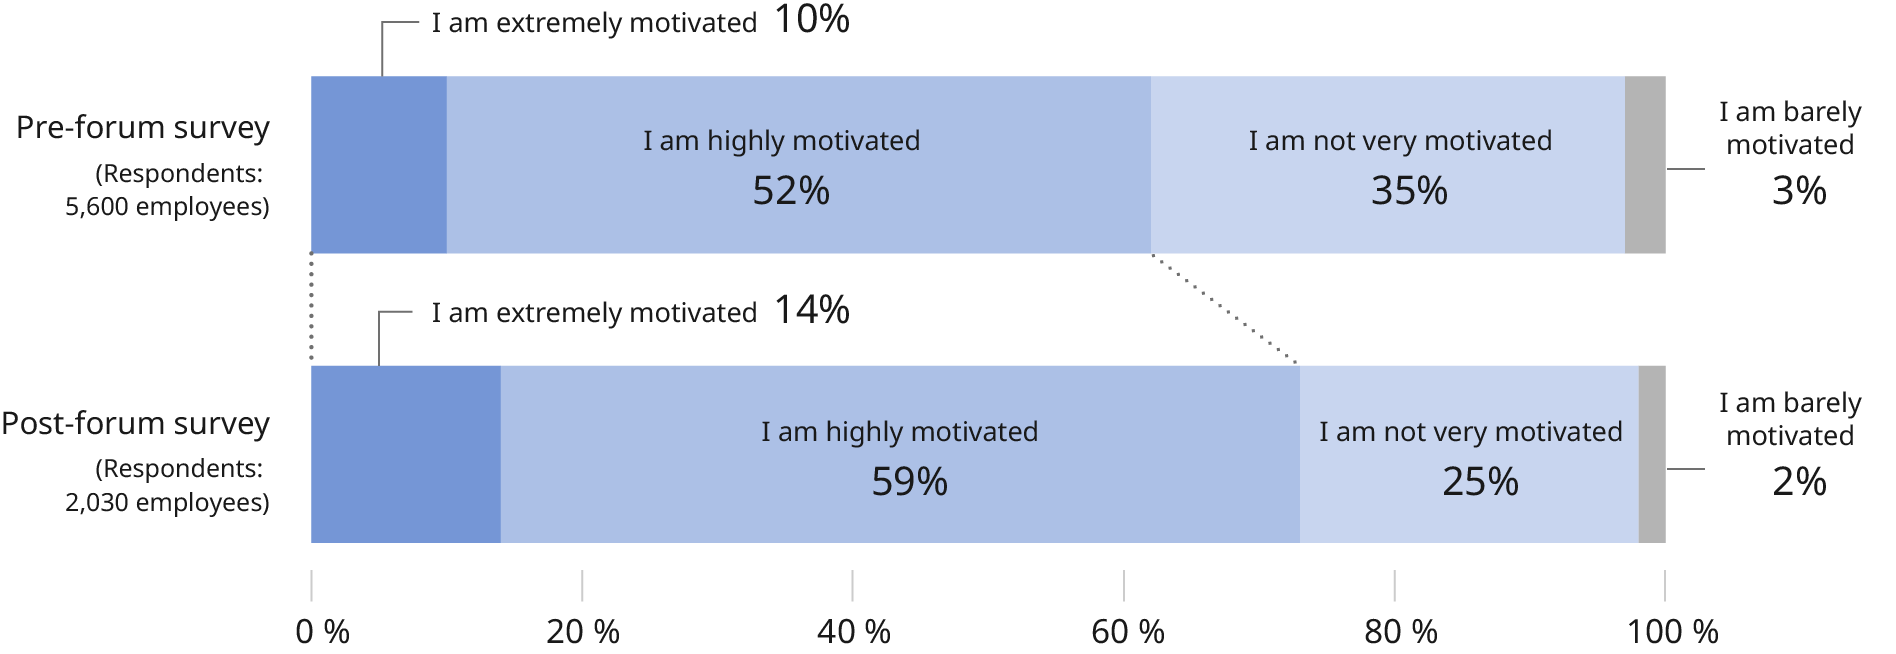 Figure: Results of the pre- and post-forum surveys to the question, "How motivated are you in your efforts to promote DEI?" There were 5,600 respondents to the pre-forum survey. 10% answered that they are extremely motivated in their efforts to promote DEI, 52% that they are highly motivated in their efforts to promote it, 35% that they are not very motivated in their efforts to promote it, and 3% that they are barely motivated in their efforts to promote it. The number of respondents to the post-forum survey was 2,030. 14% answered that they are extremely motivated in their efforts to promote DEI, 59% that they are highly motivated in their efforts to promote it, 25% that they are not very motivated in their efforts to promote it, and 2% that they are barely motivated in their efforts to promote it.